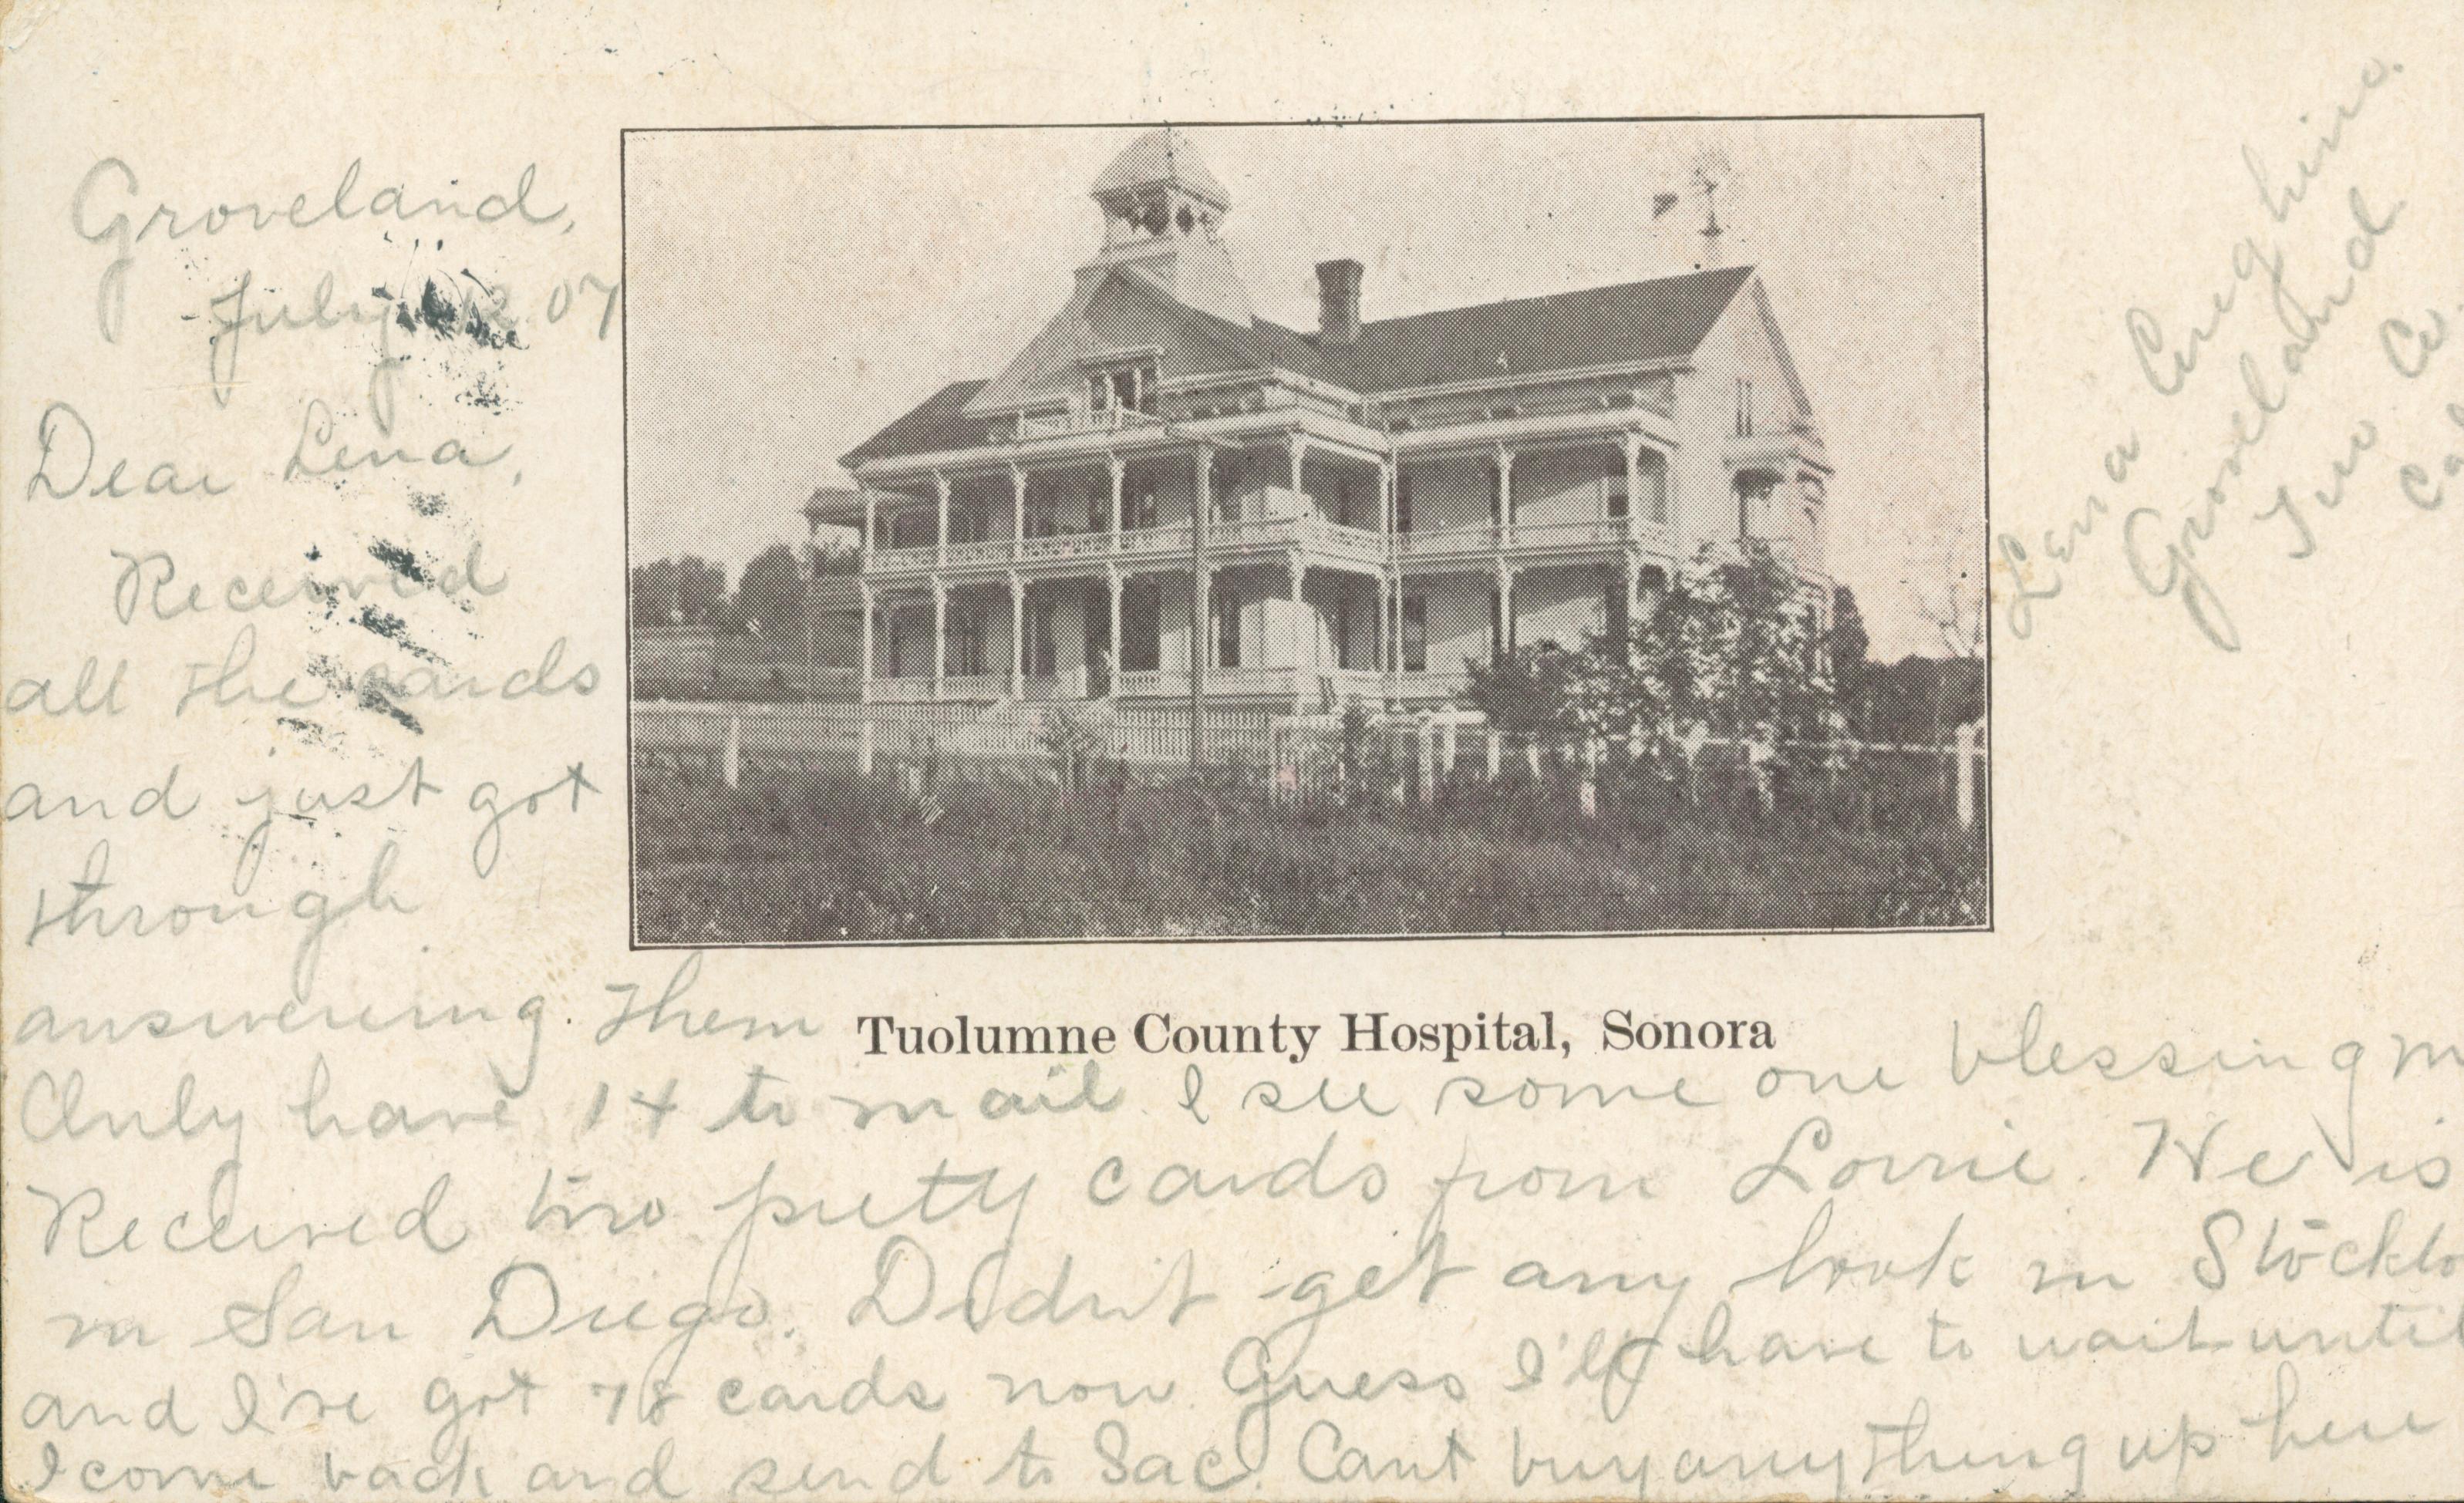 Shows the exterior of the Tuolumne County Hospital